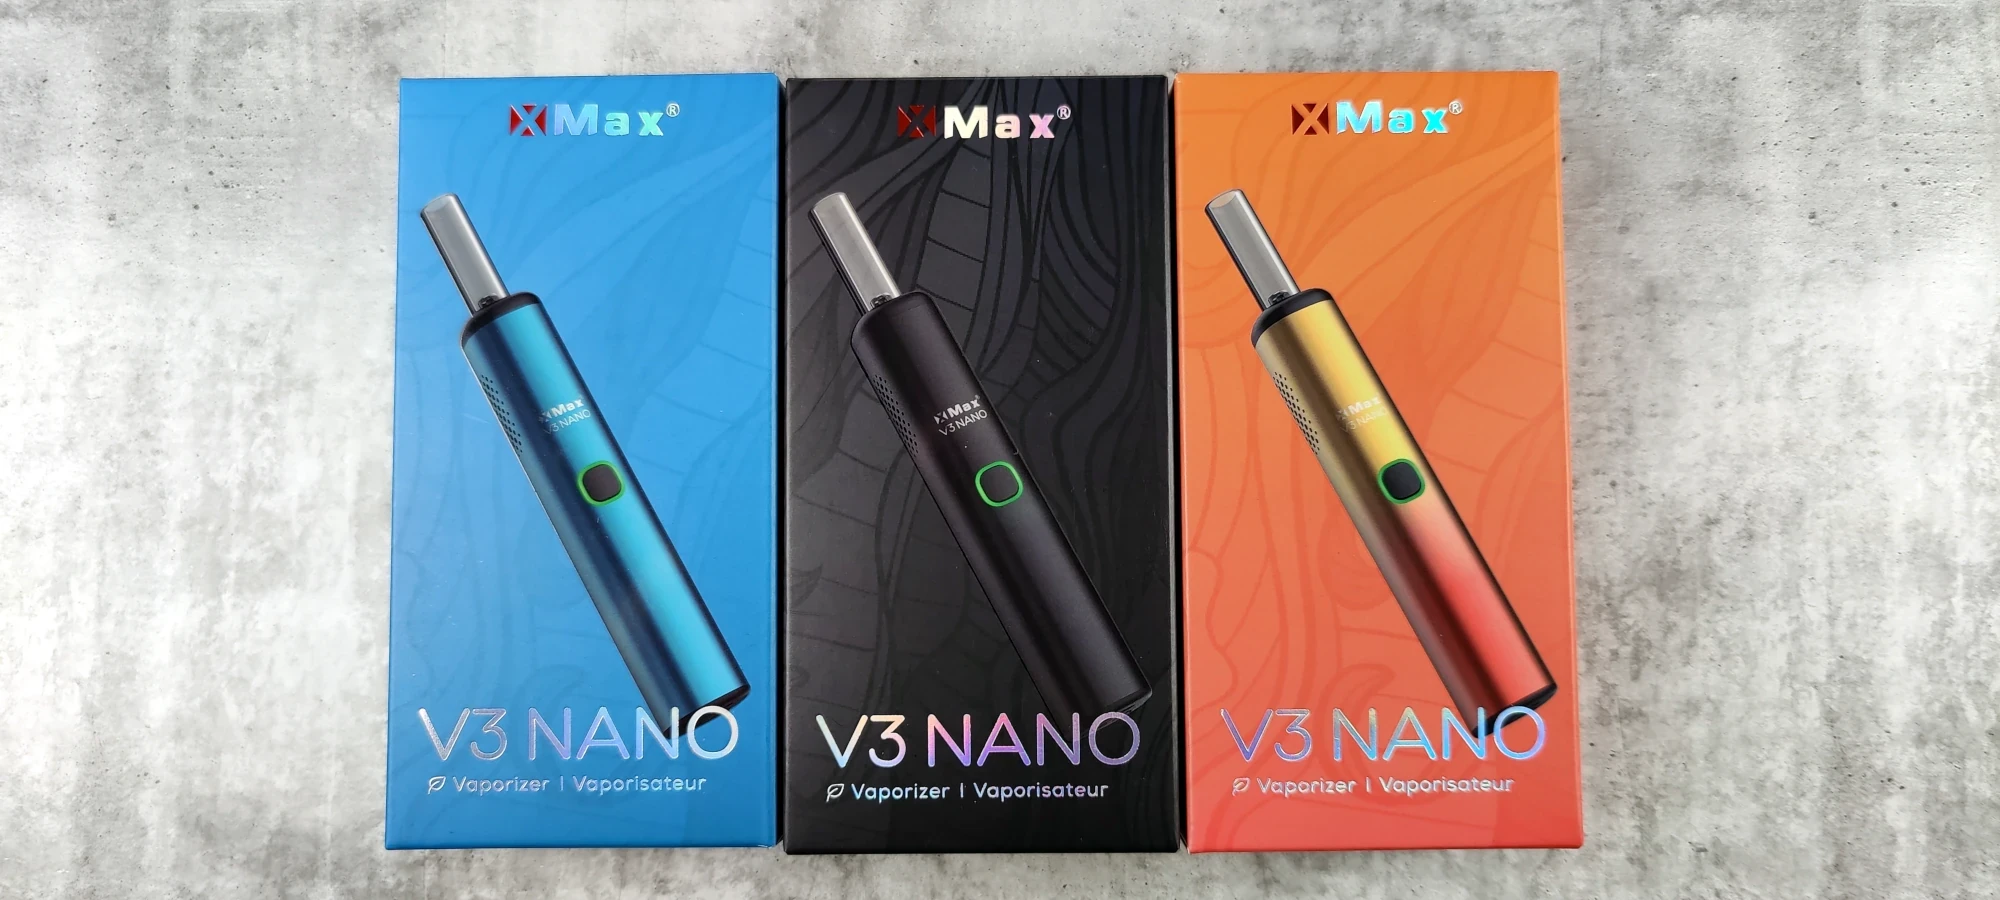 The various different colors of XMAX V3 Nano that are available